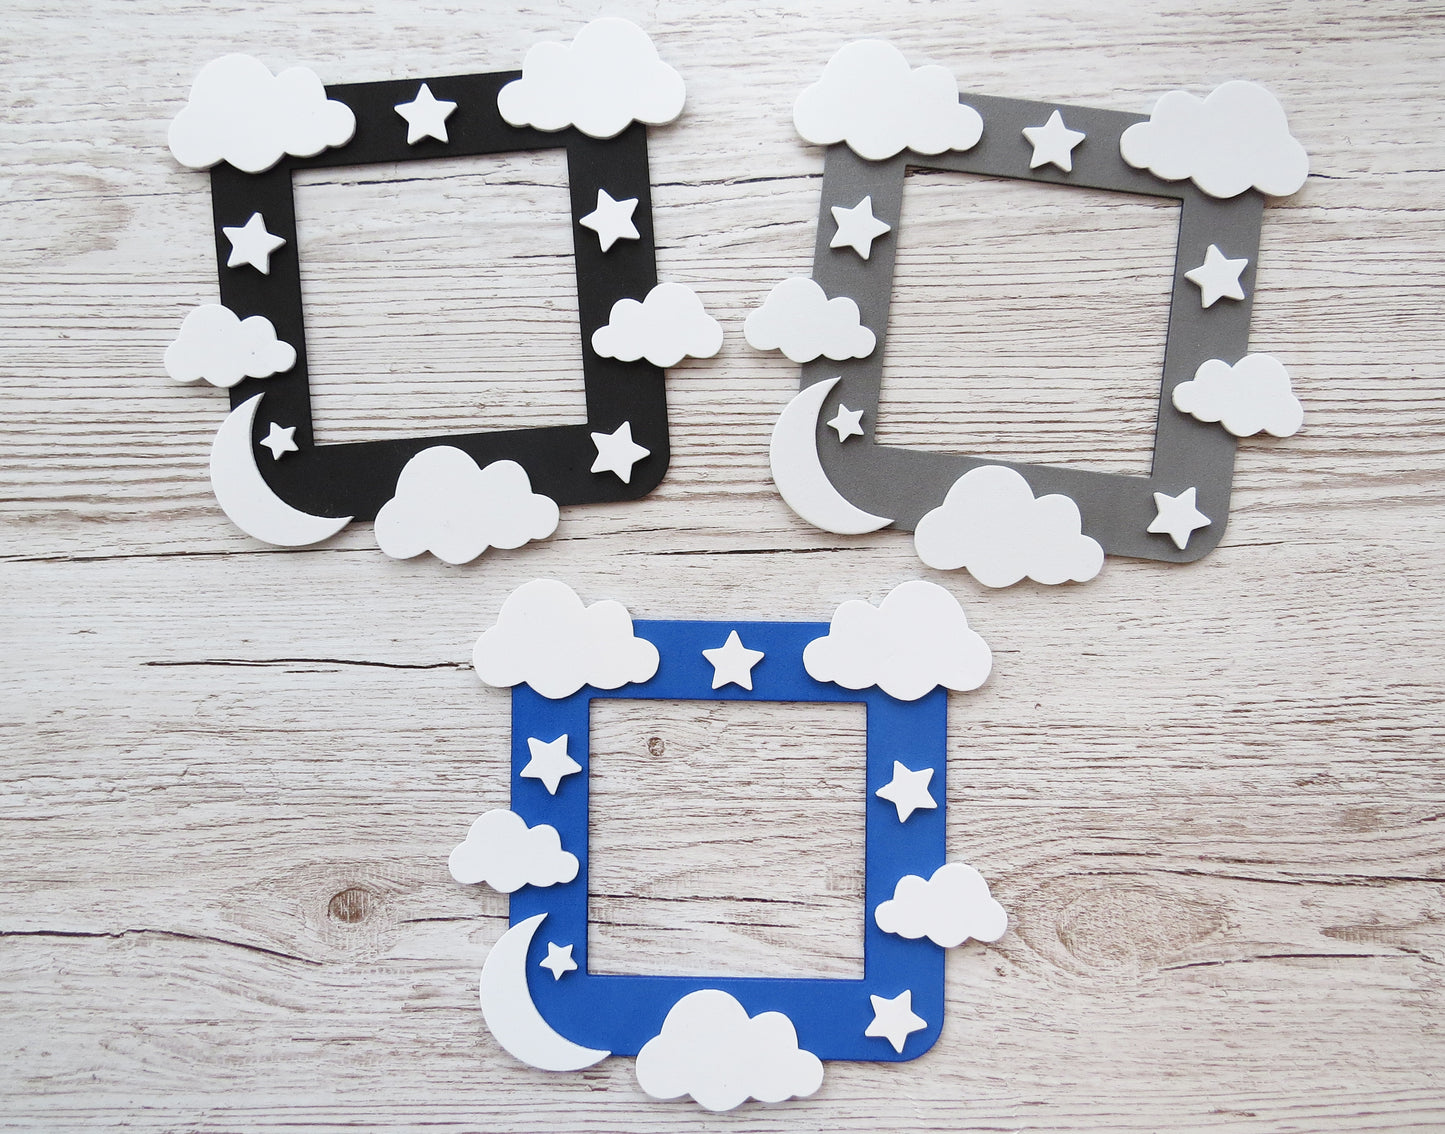 Craft foam light switch surround designed with clouds, stars  and a moon.